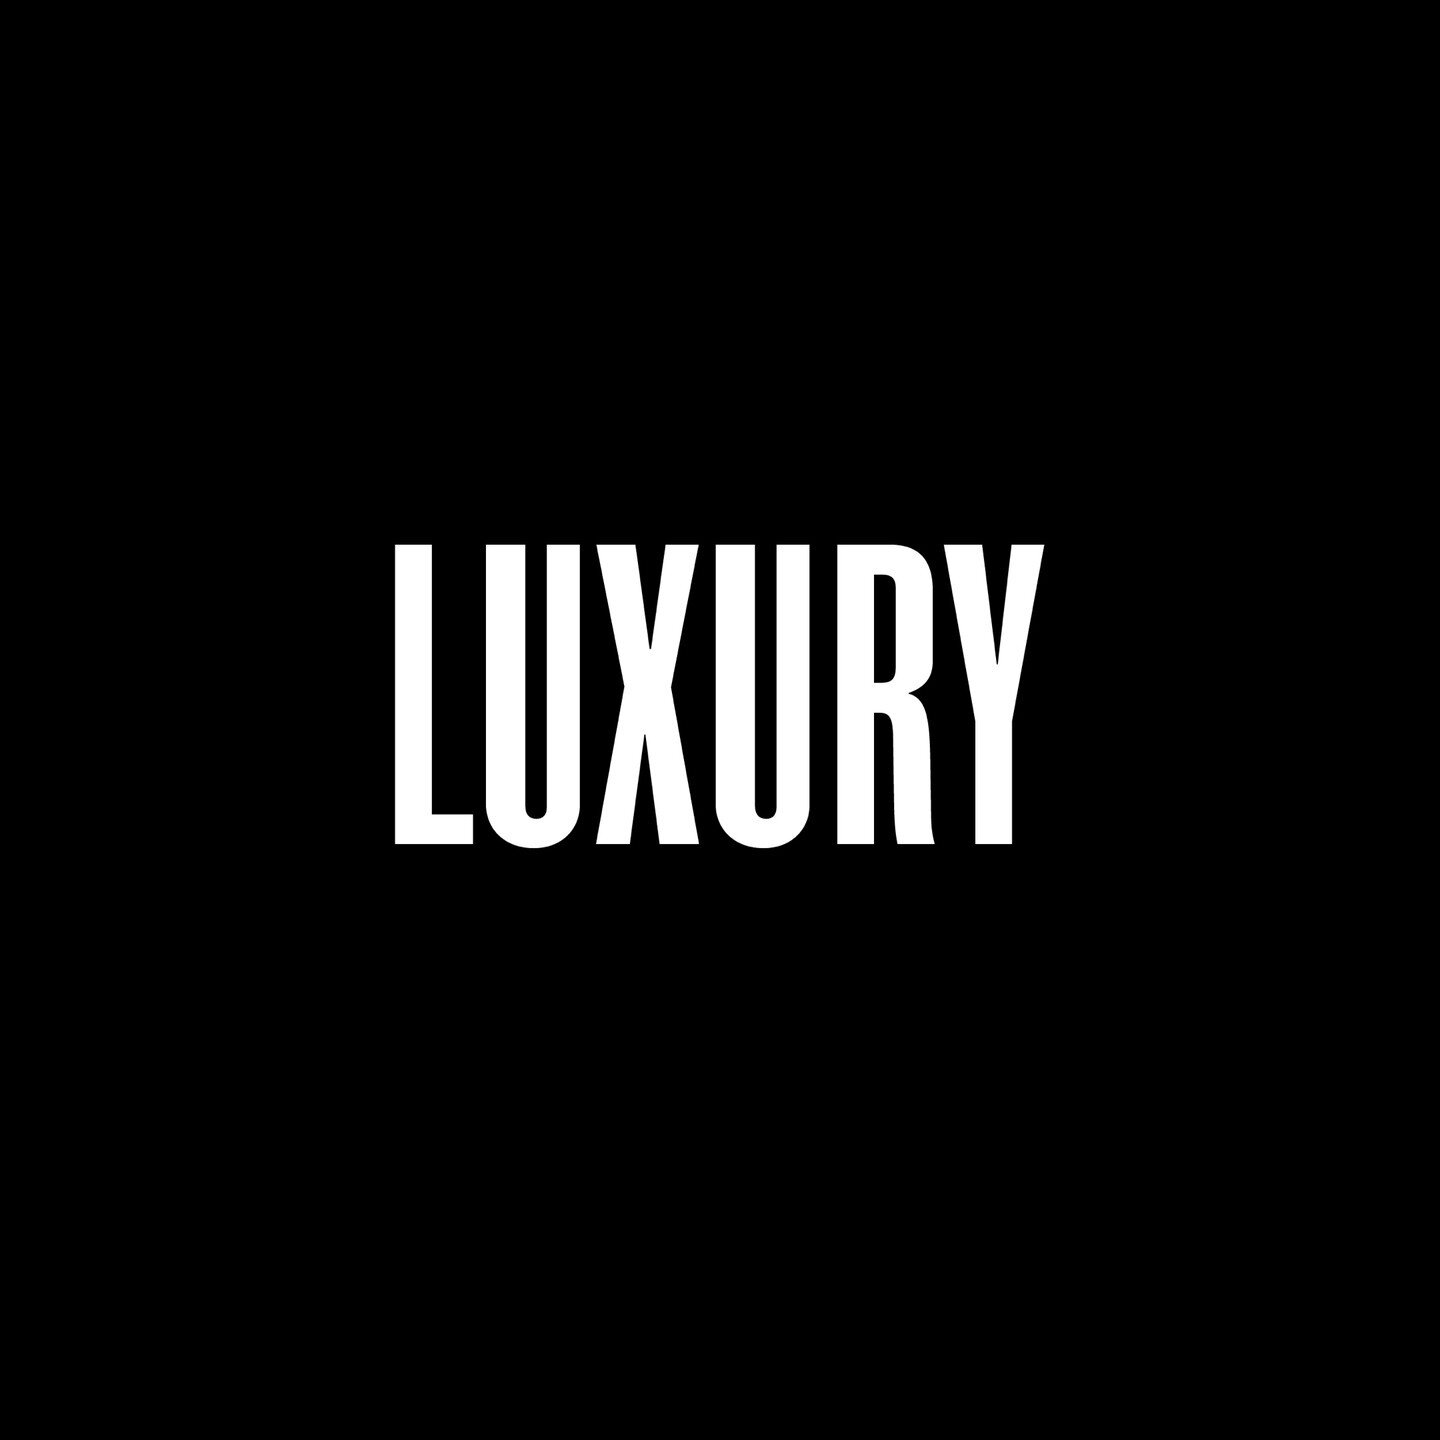 LUXURY Travel by Design.

A condition of abundance: adding pleasure or comfort: an indulgence. 

How do you define Luxury?

#luxurytravelplanner